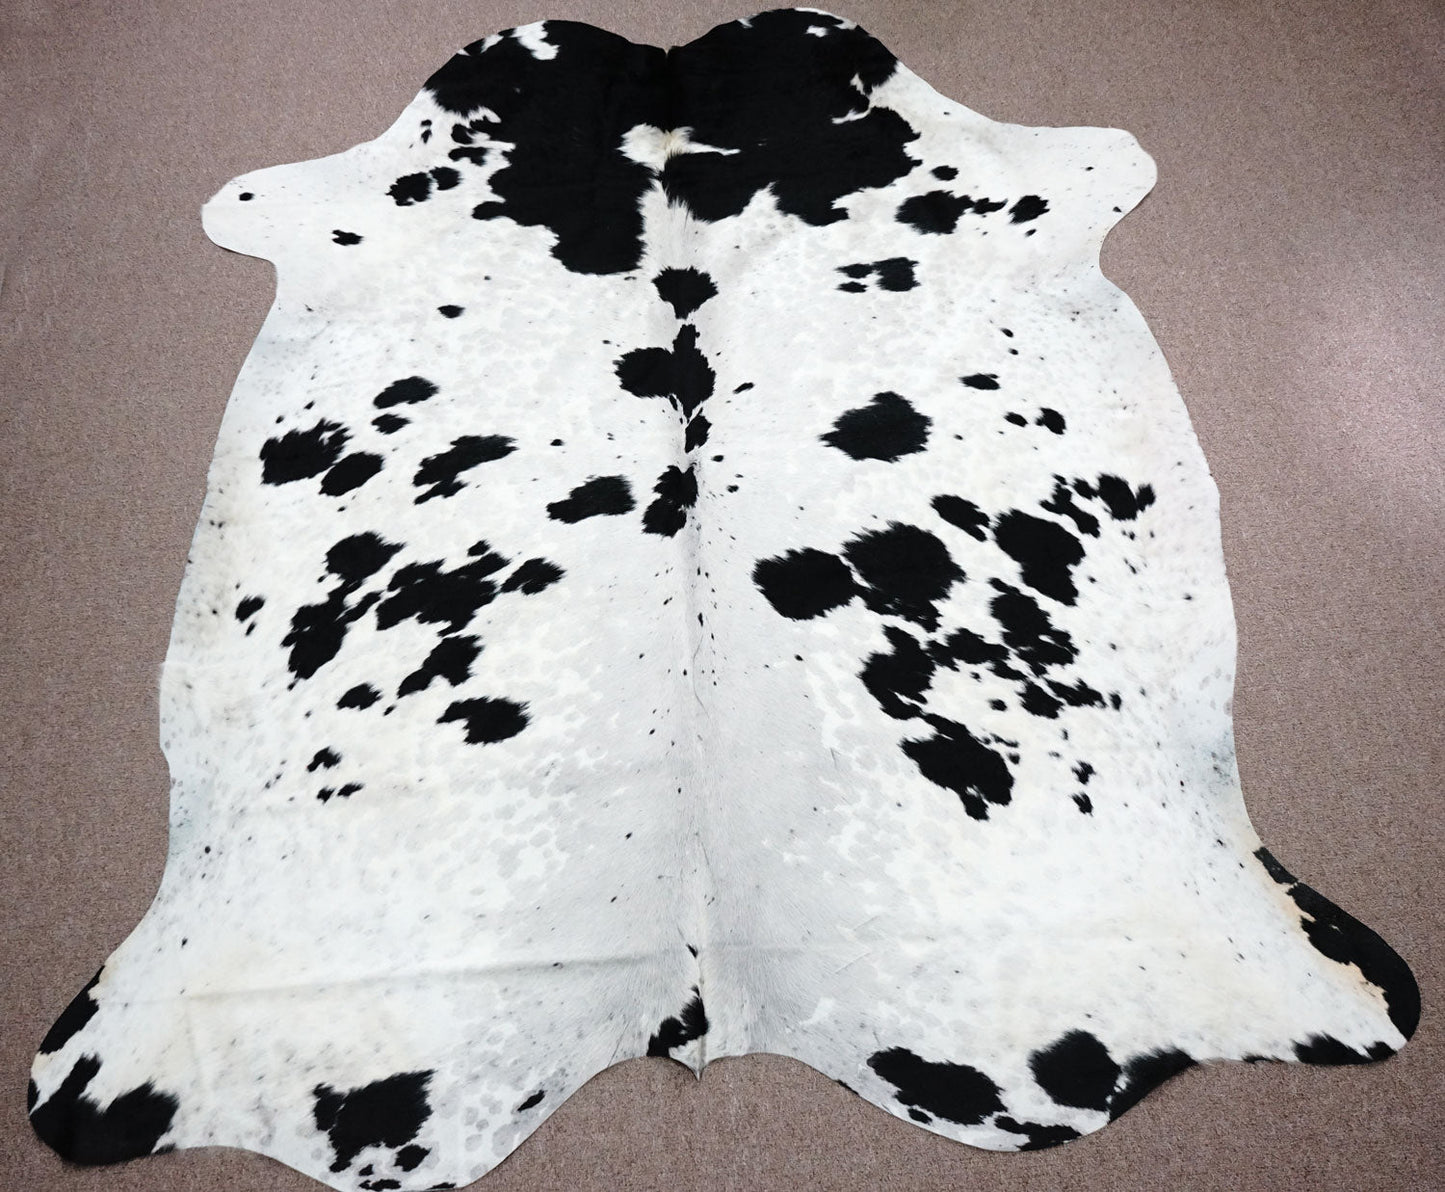 Extra Large spotted cowhide rug 6.6 x7.6 ft -4104 - Rodeo Cowhide Rugs